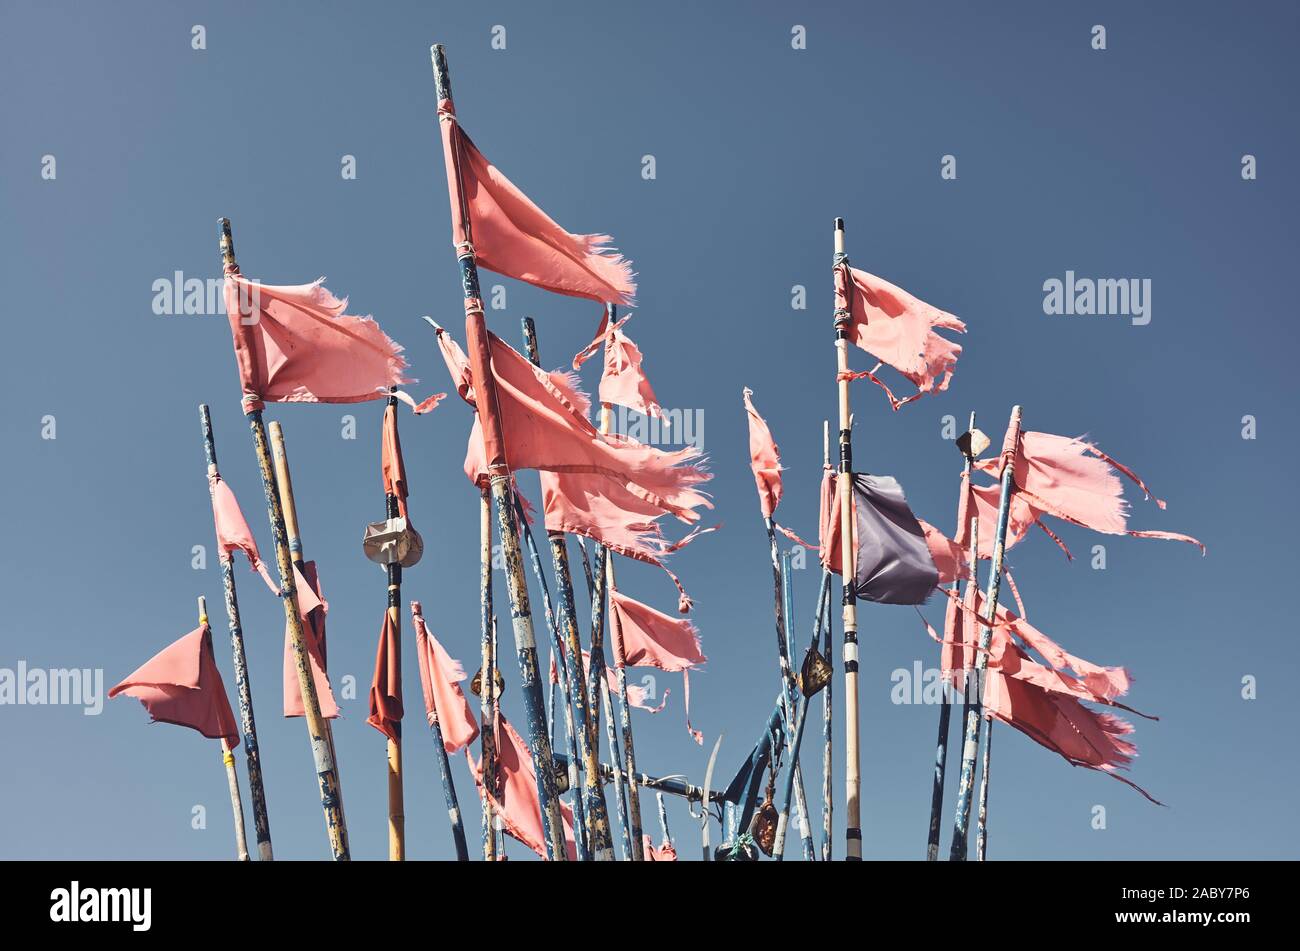 Ragged fishing marker flags against the blue sky, color toning applied. Stock Photo